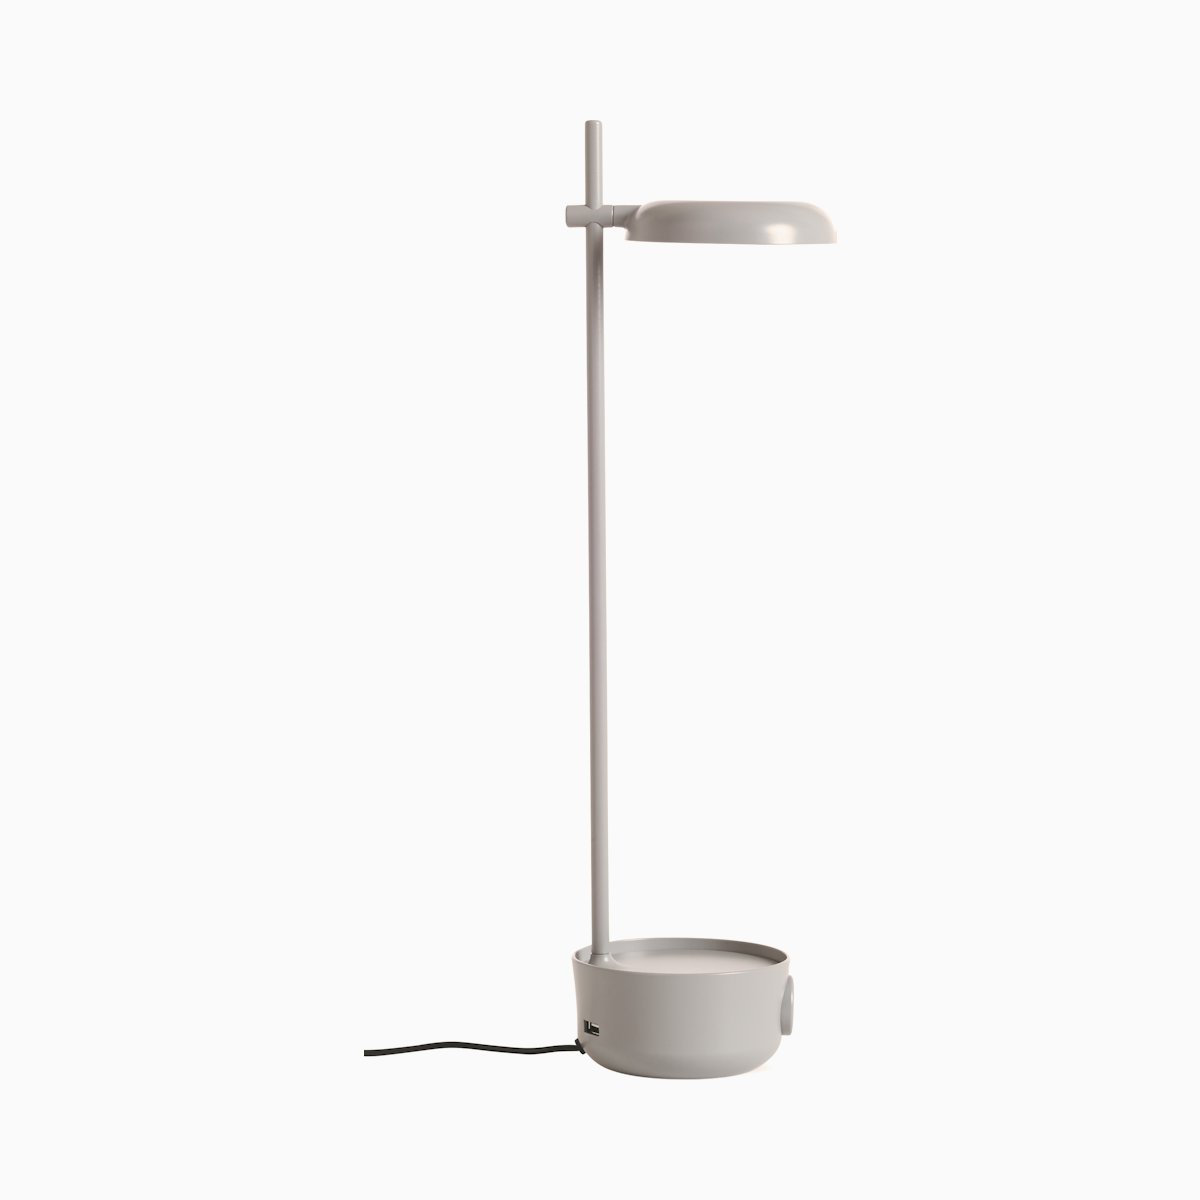 Focal LED Lamp with USB Port